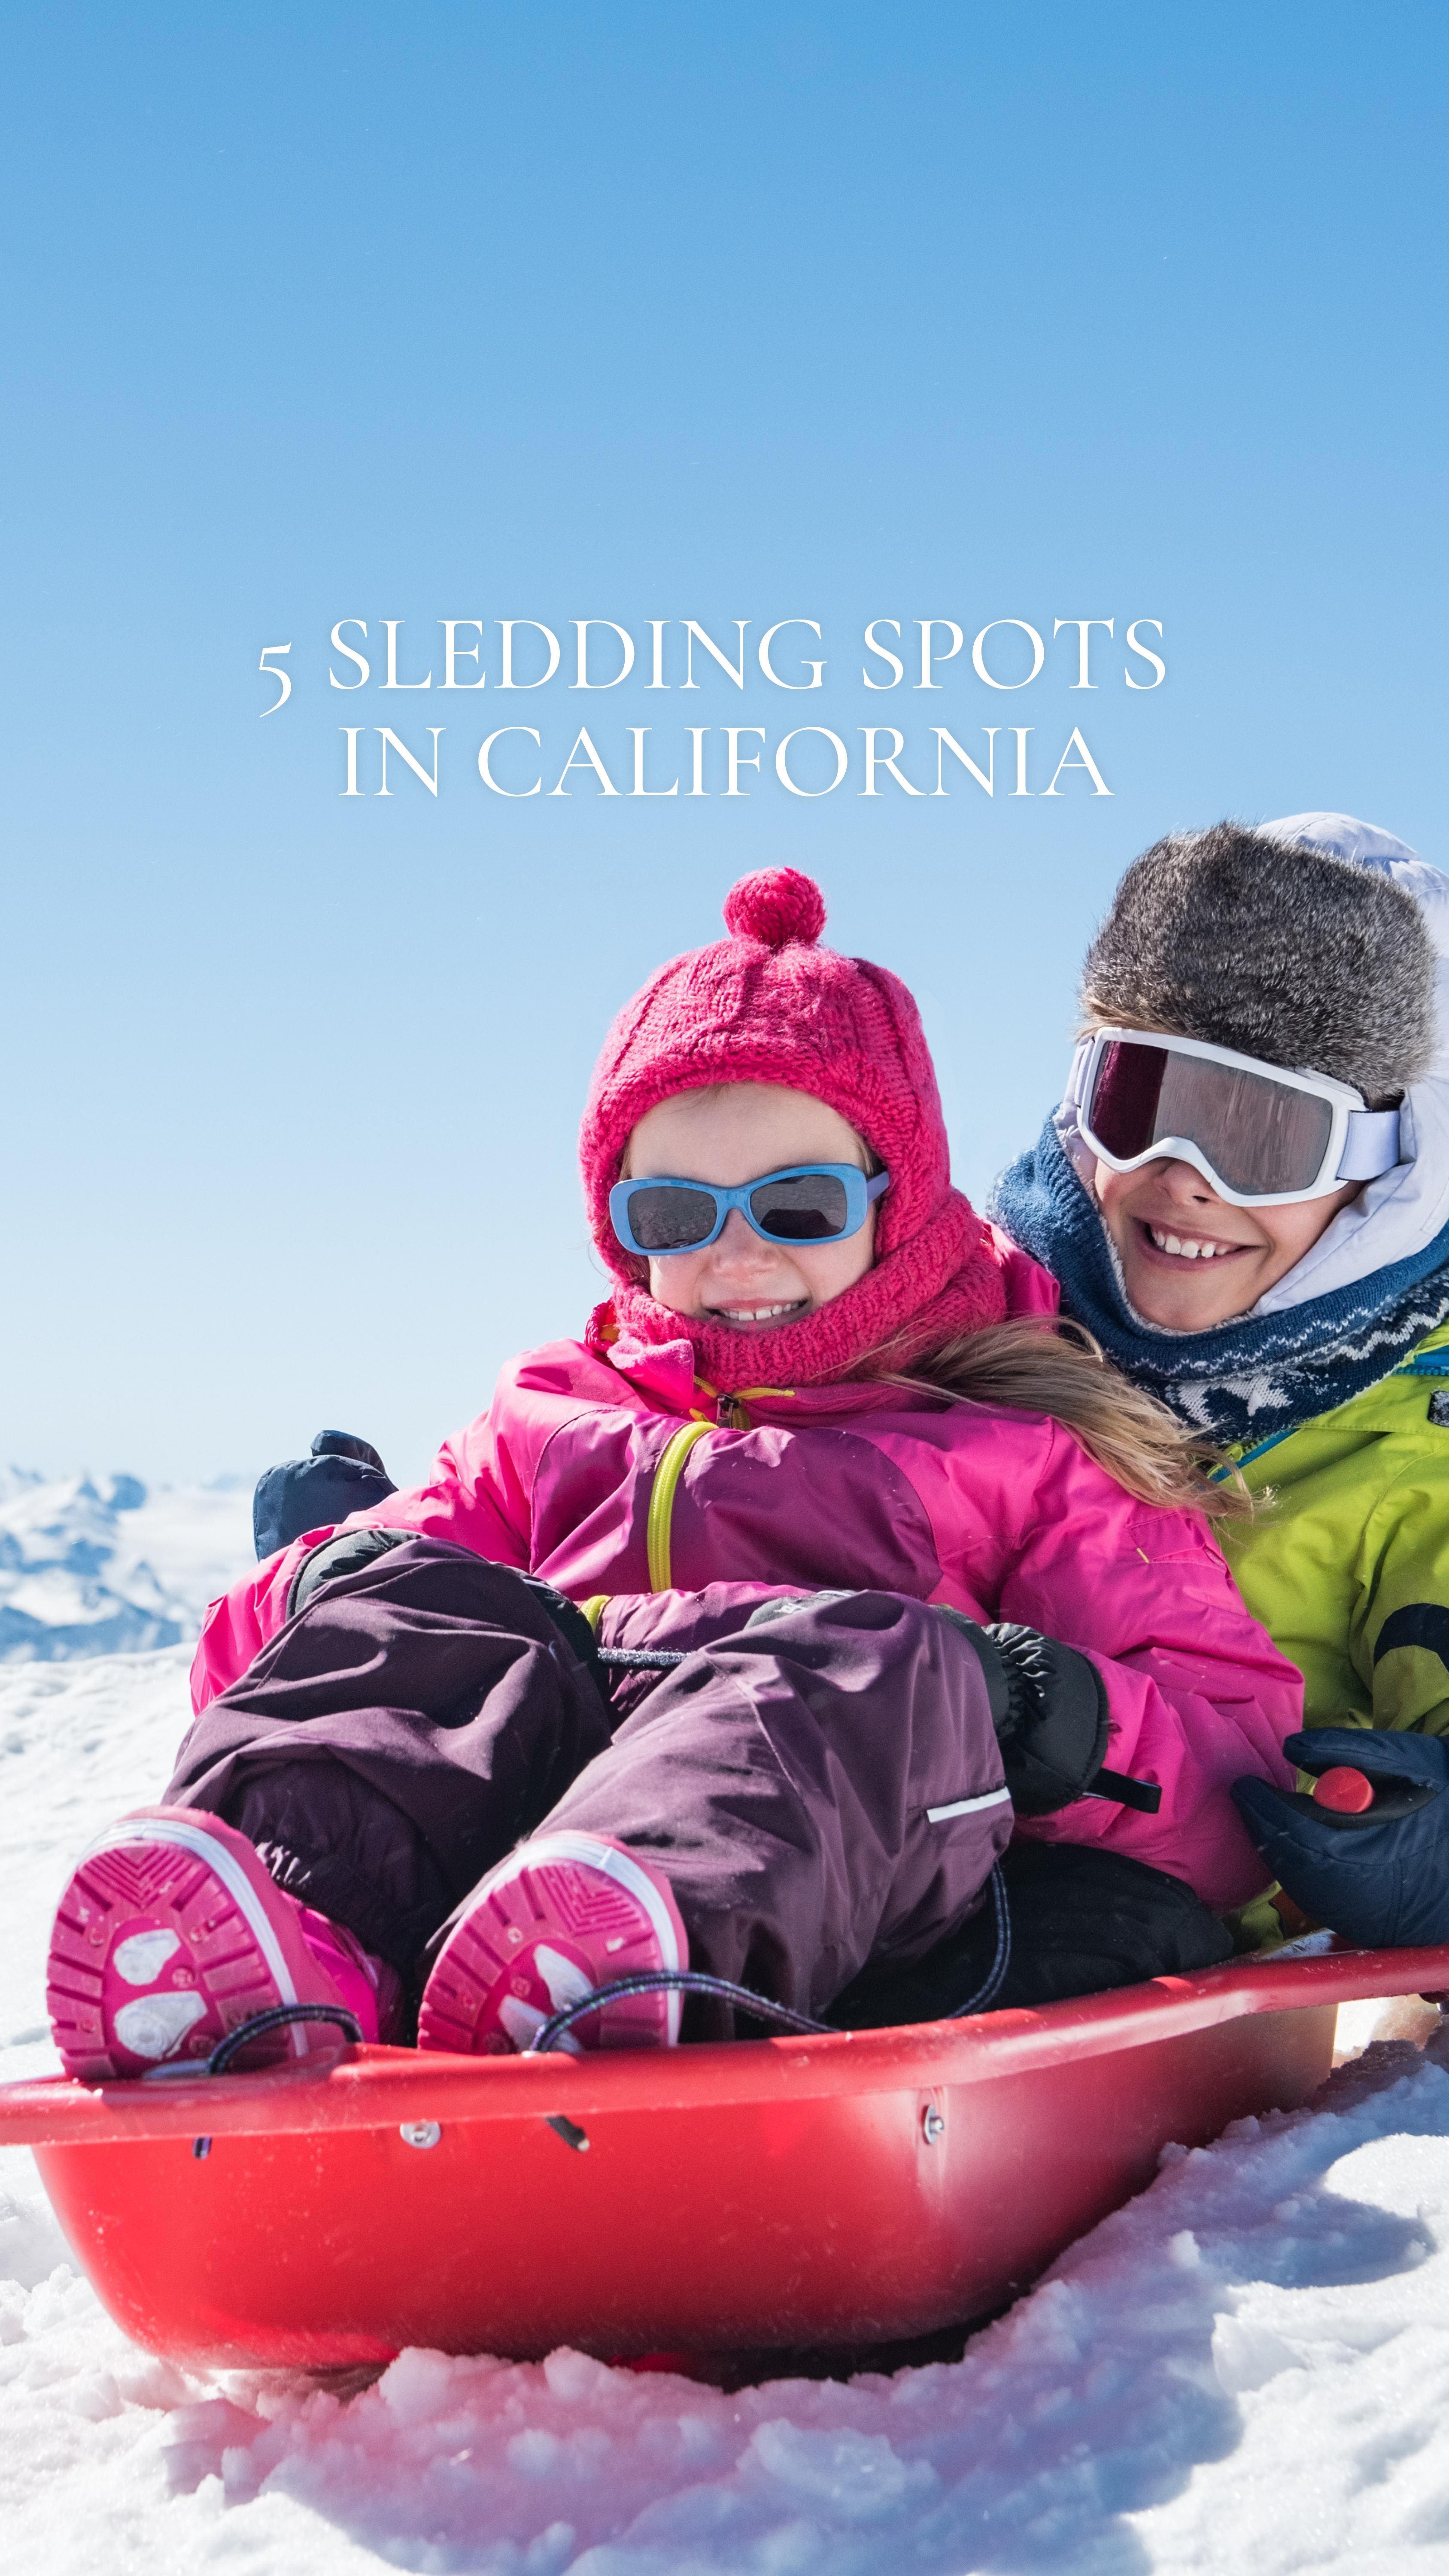 5 Sledding Spots in California 🛷 enjoy the snowy months by grabbing your friends and family and heading to the hills! Bundle up and bring your hot chocolate because there’s a full day of fun ahead. Read the full article using the link in our bio.